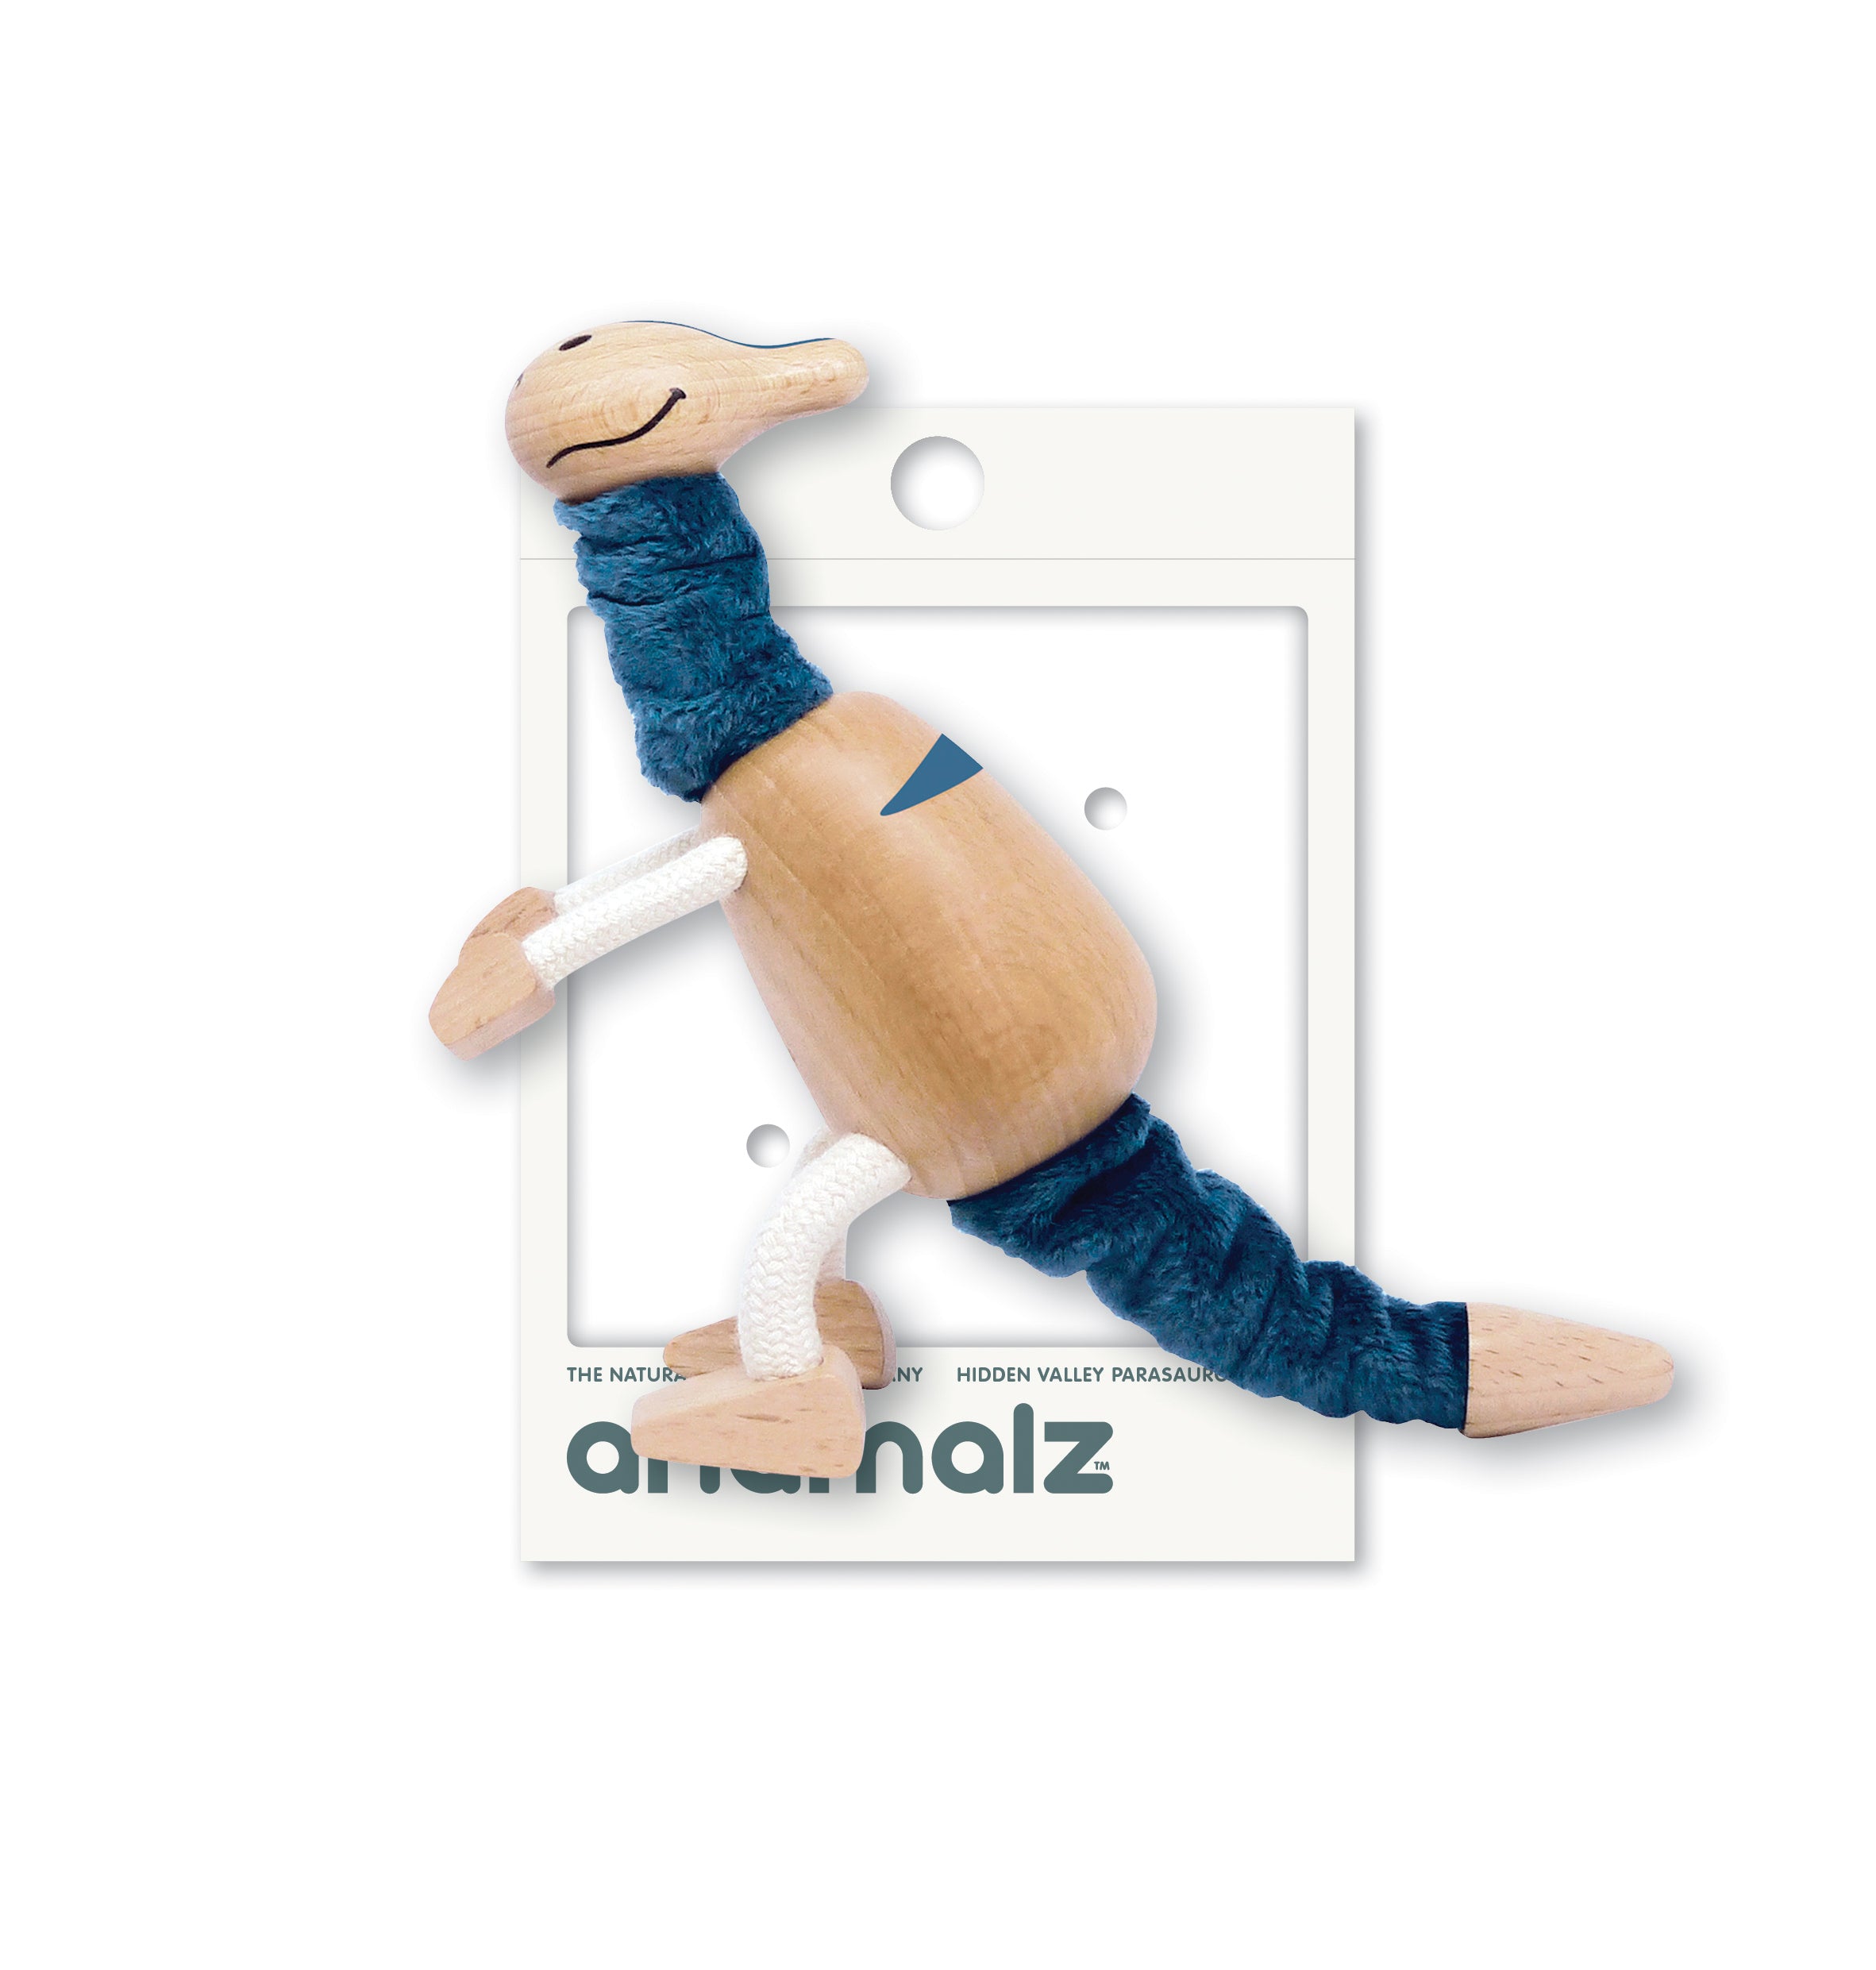 Adorable eco-friendly wooden Parasaurolophus dinosaur toy with blue stripe and bendy tail, perfect for imaginative play and learning.